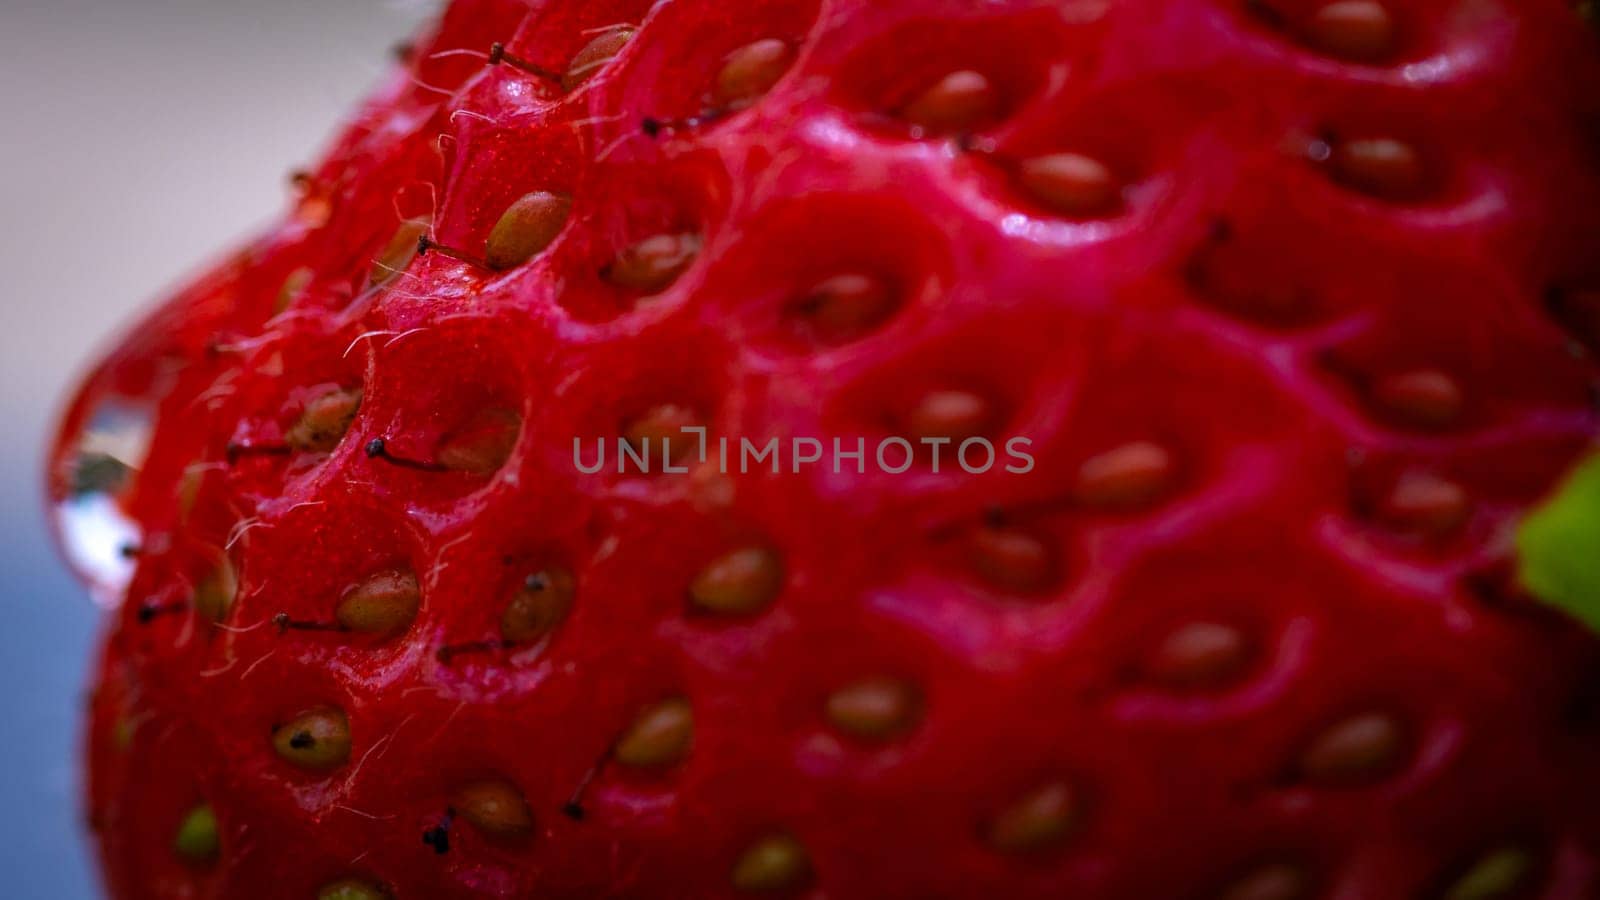 Close up of fresh strawberry showing seeds achenes. Water drop on fresh ripe red strawberry.